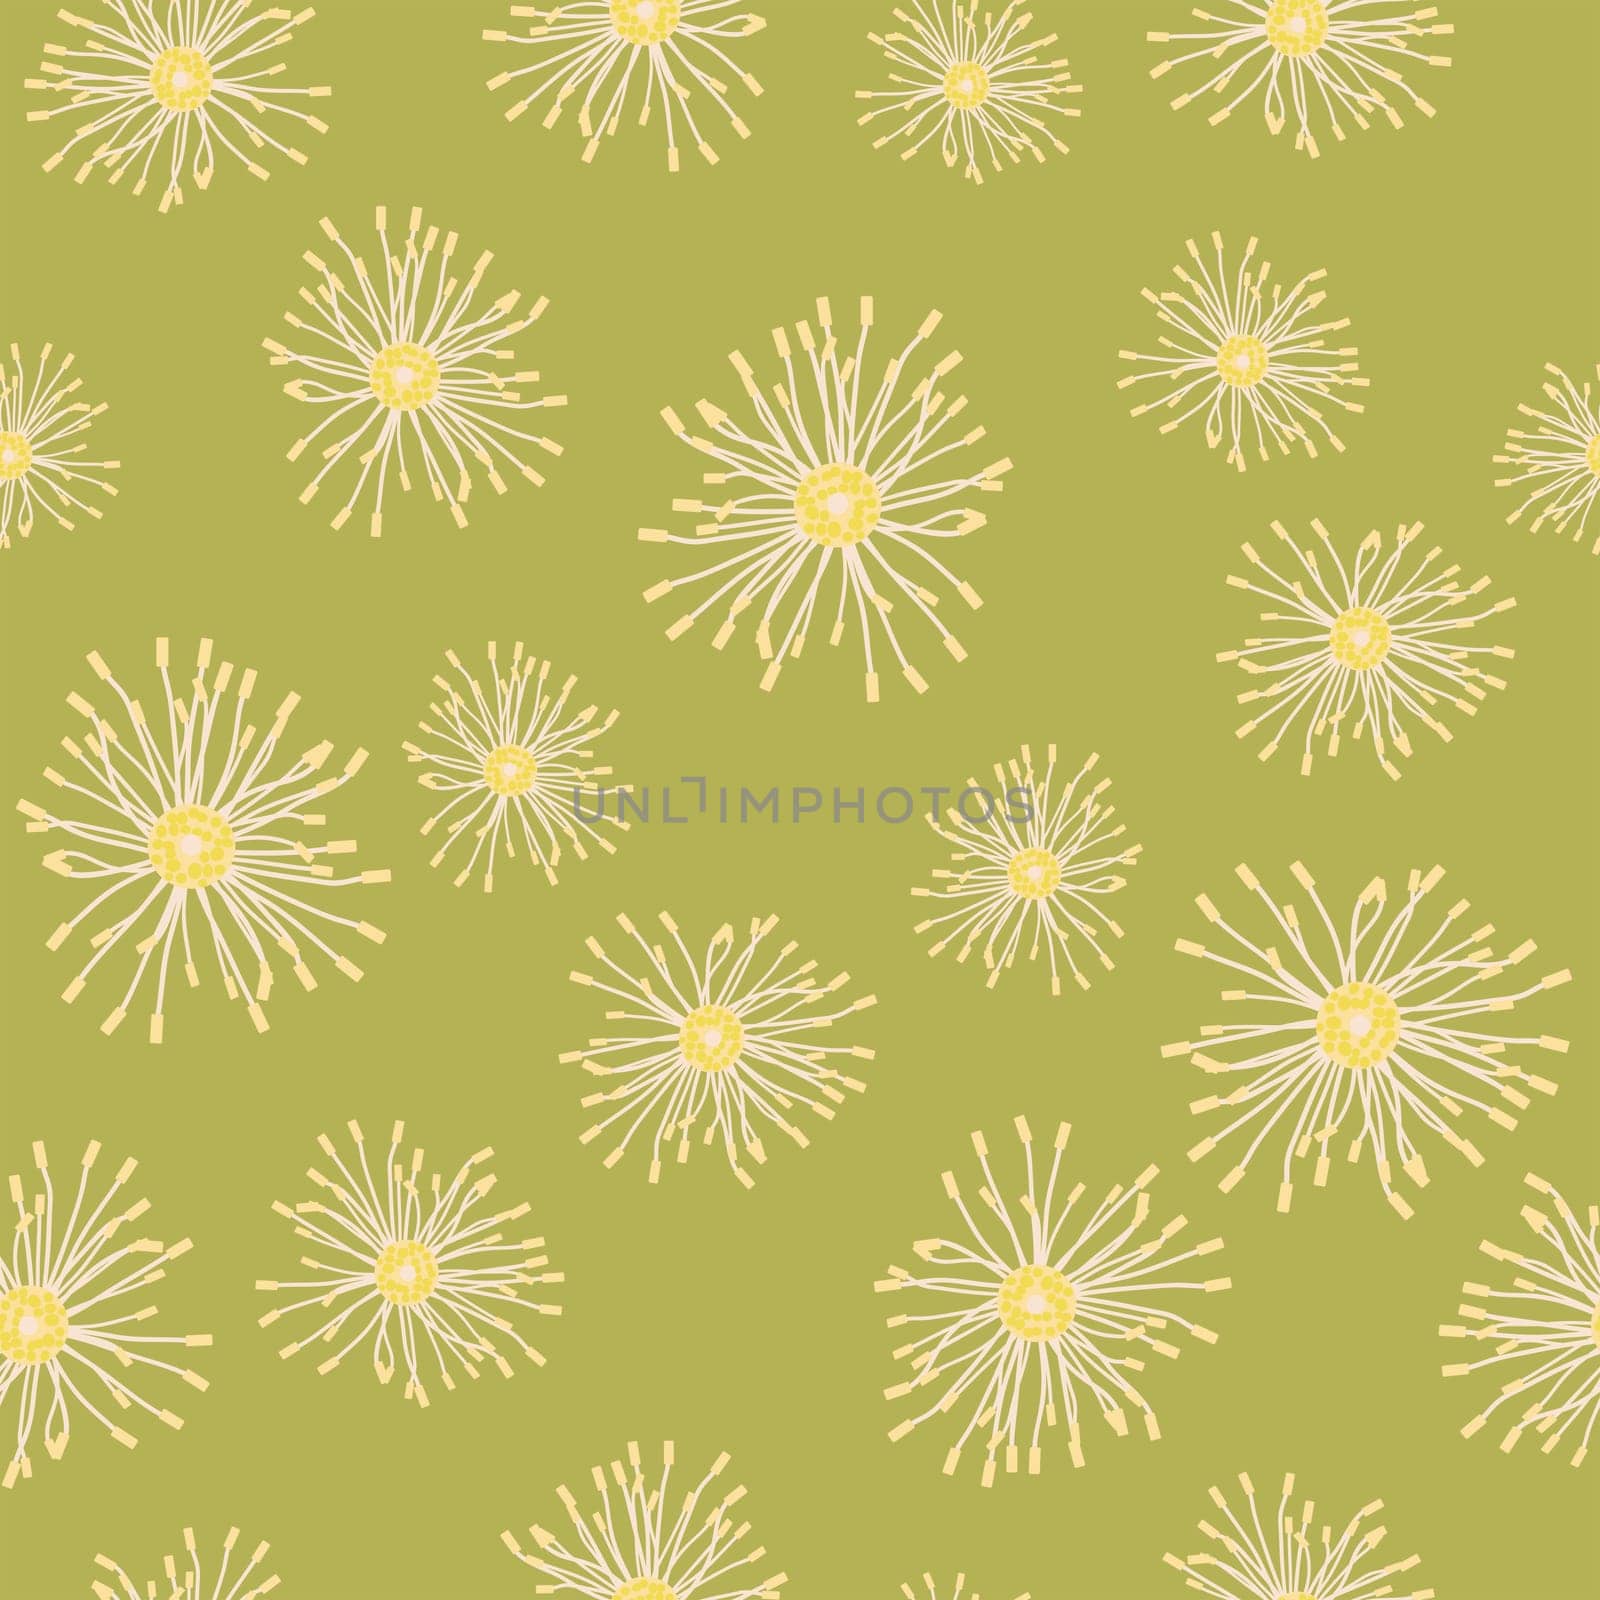 Yellow flowers on green background, abstract seammless pattern by hibrida13